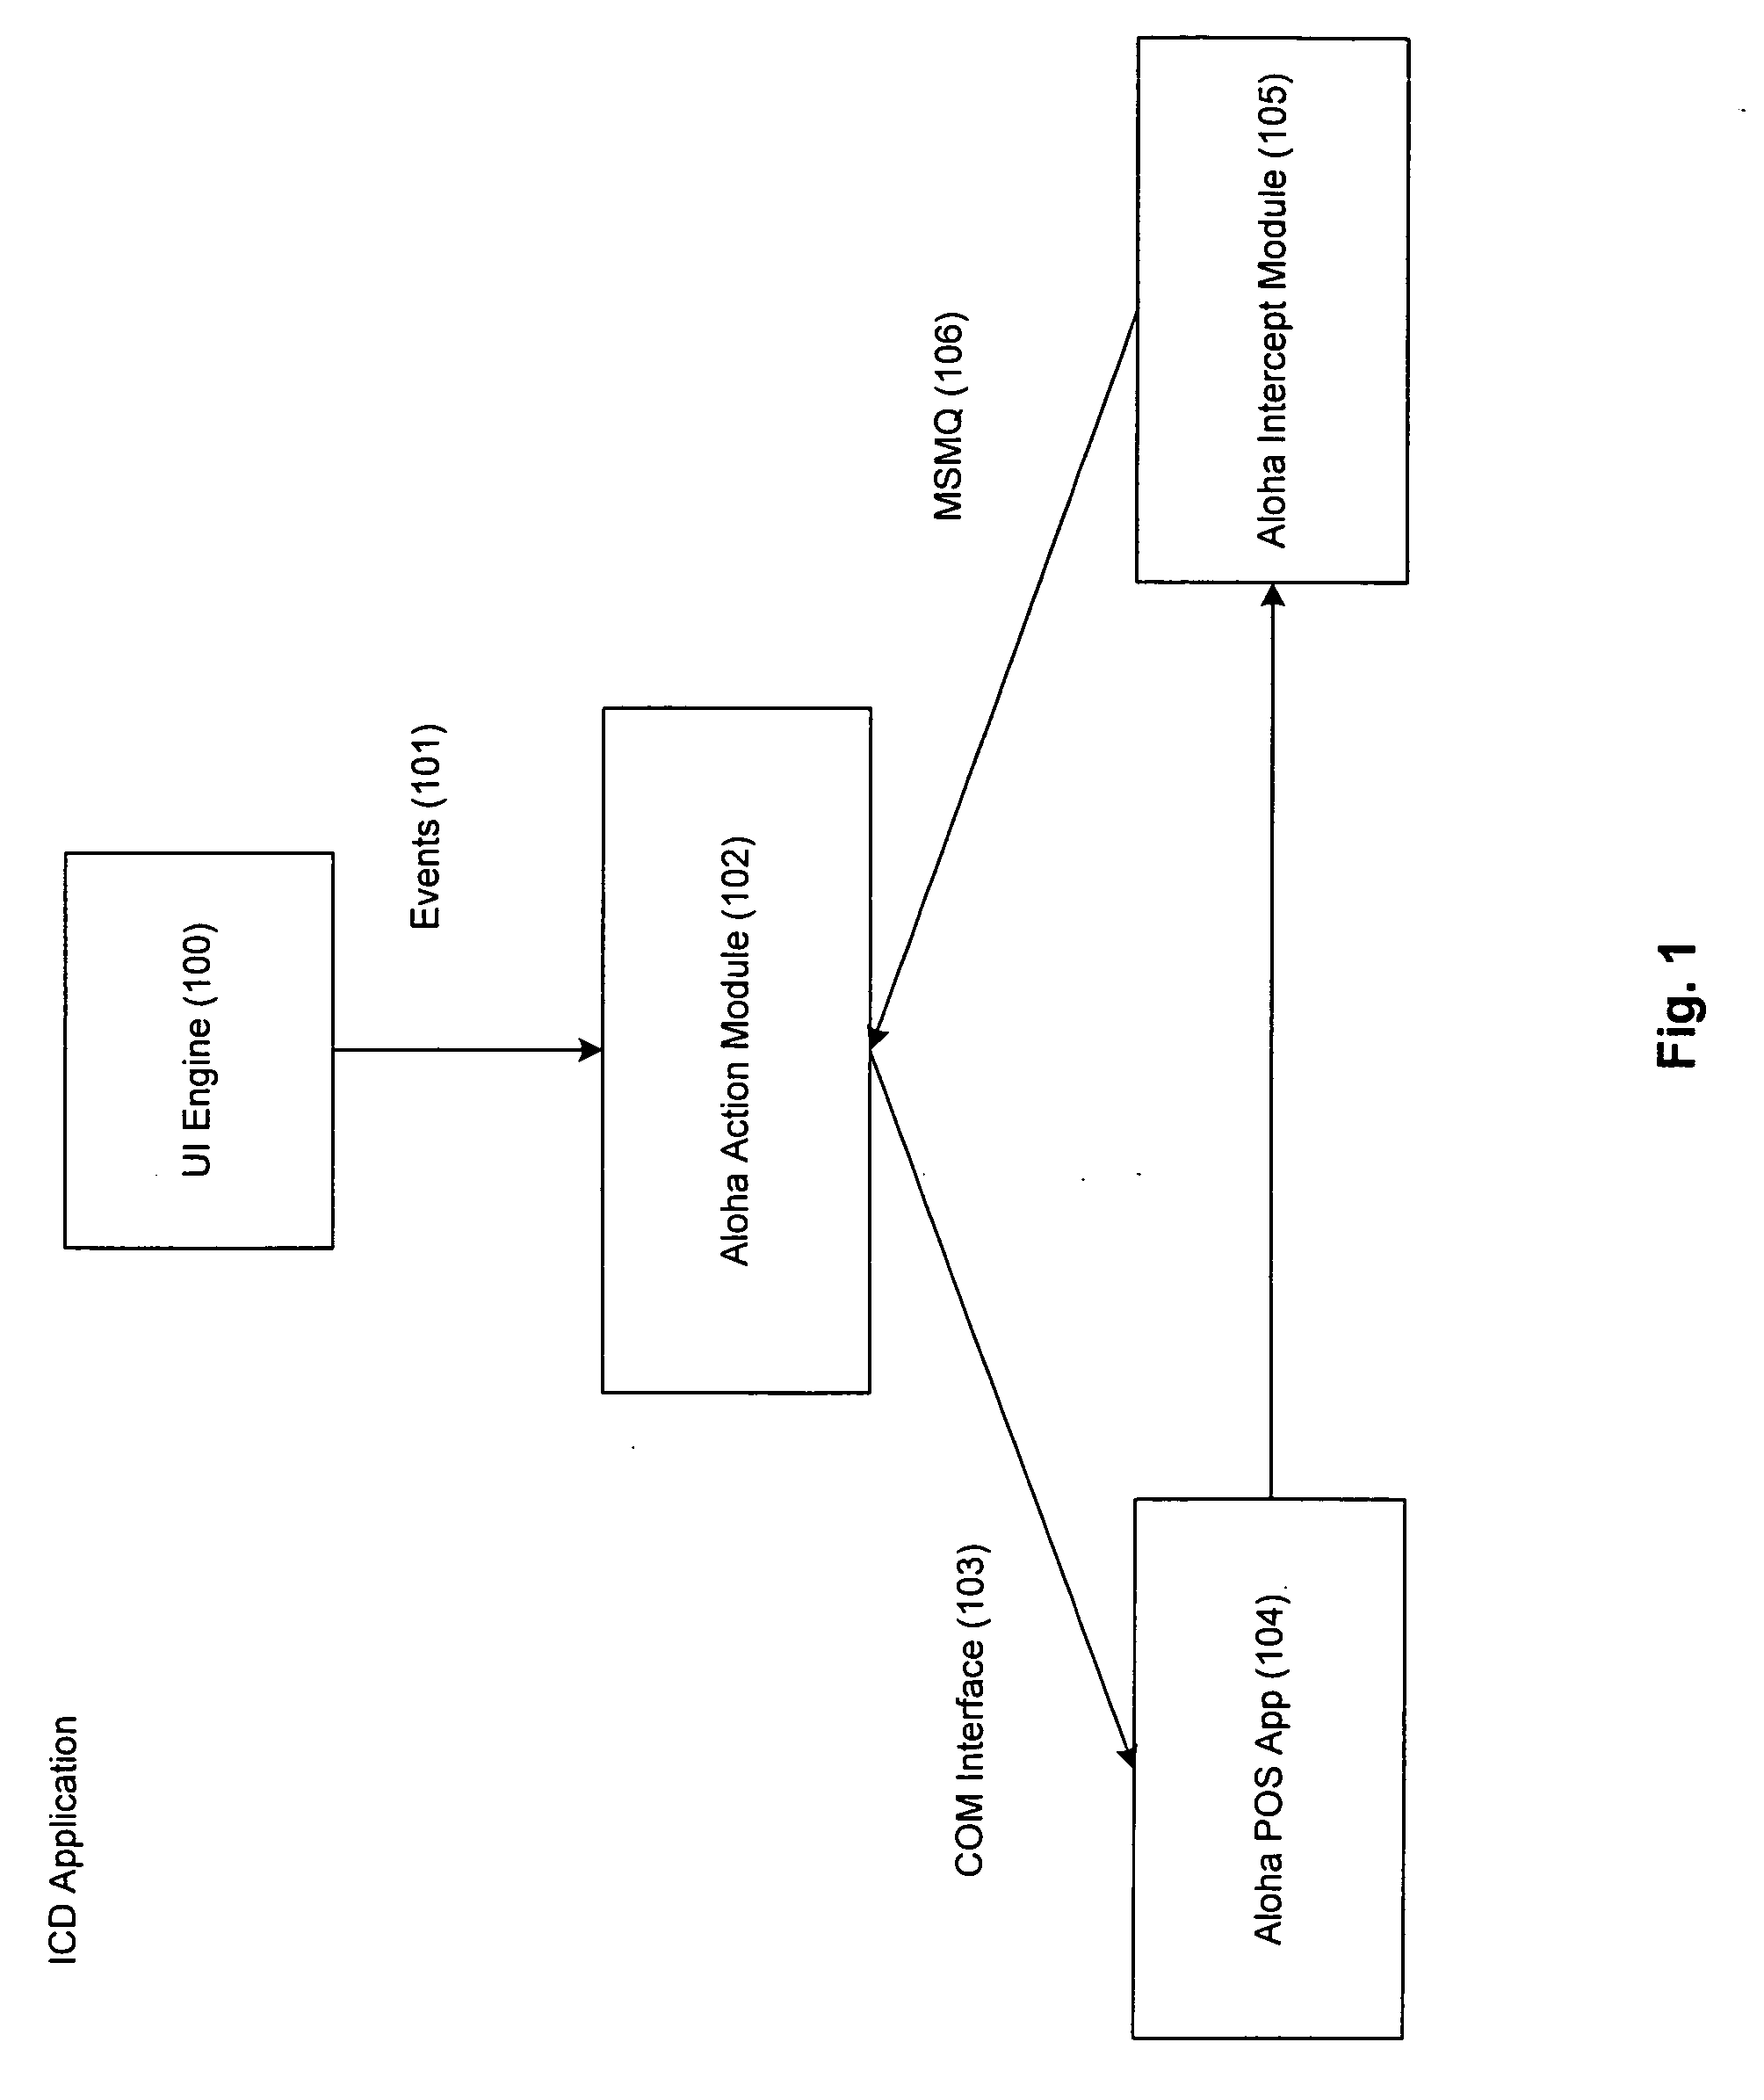 Interactive customer display system and method